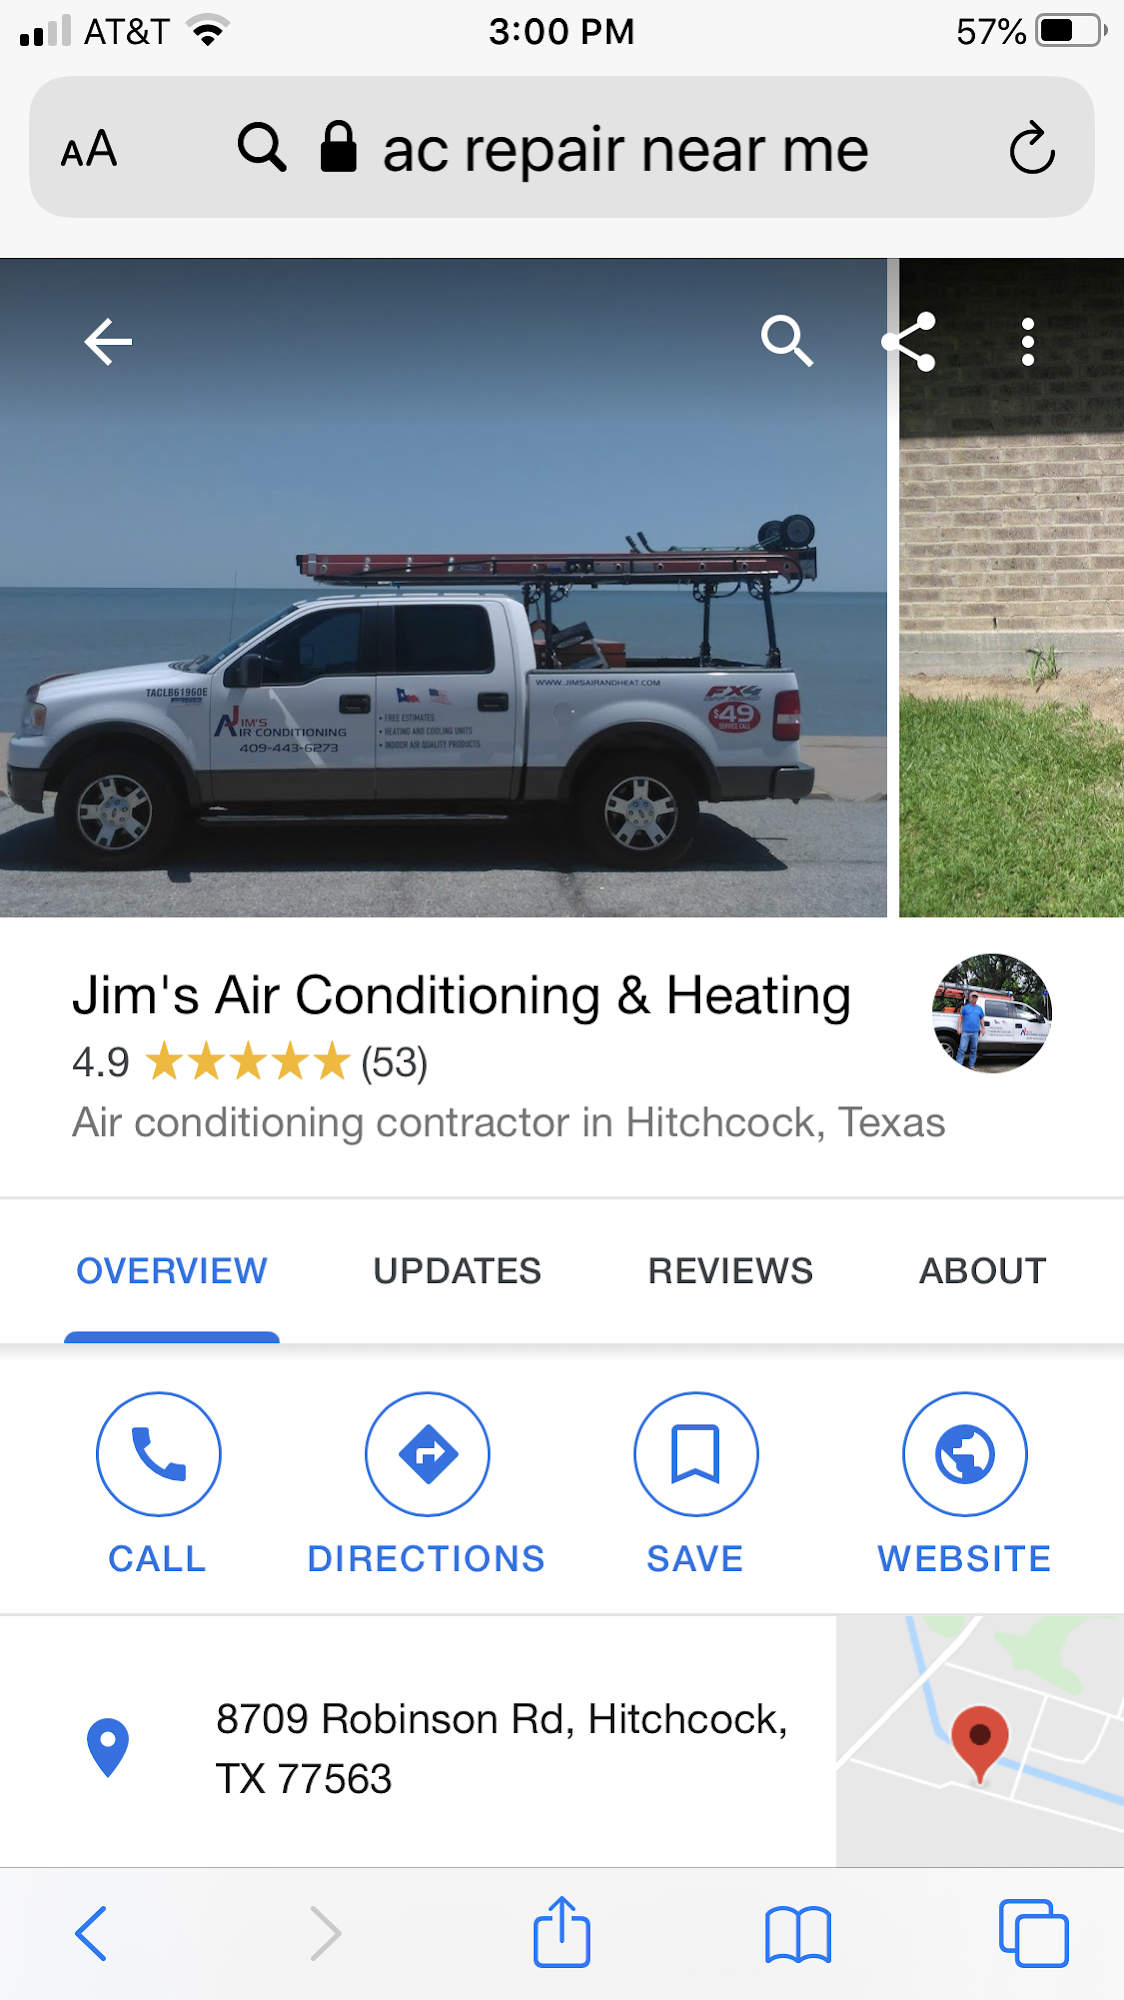 Jim's Air Conditioning & Heating